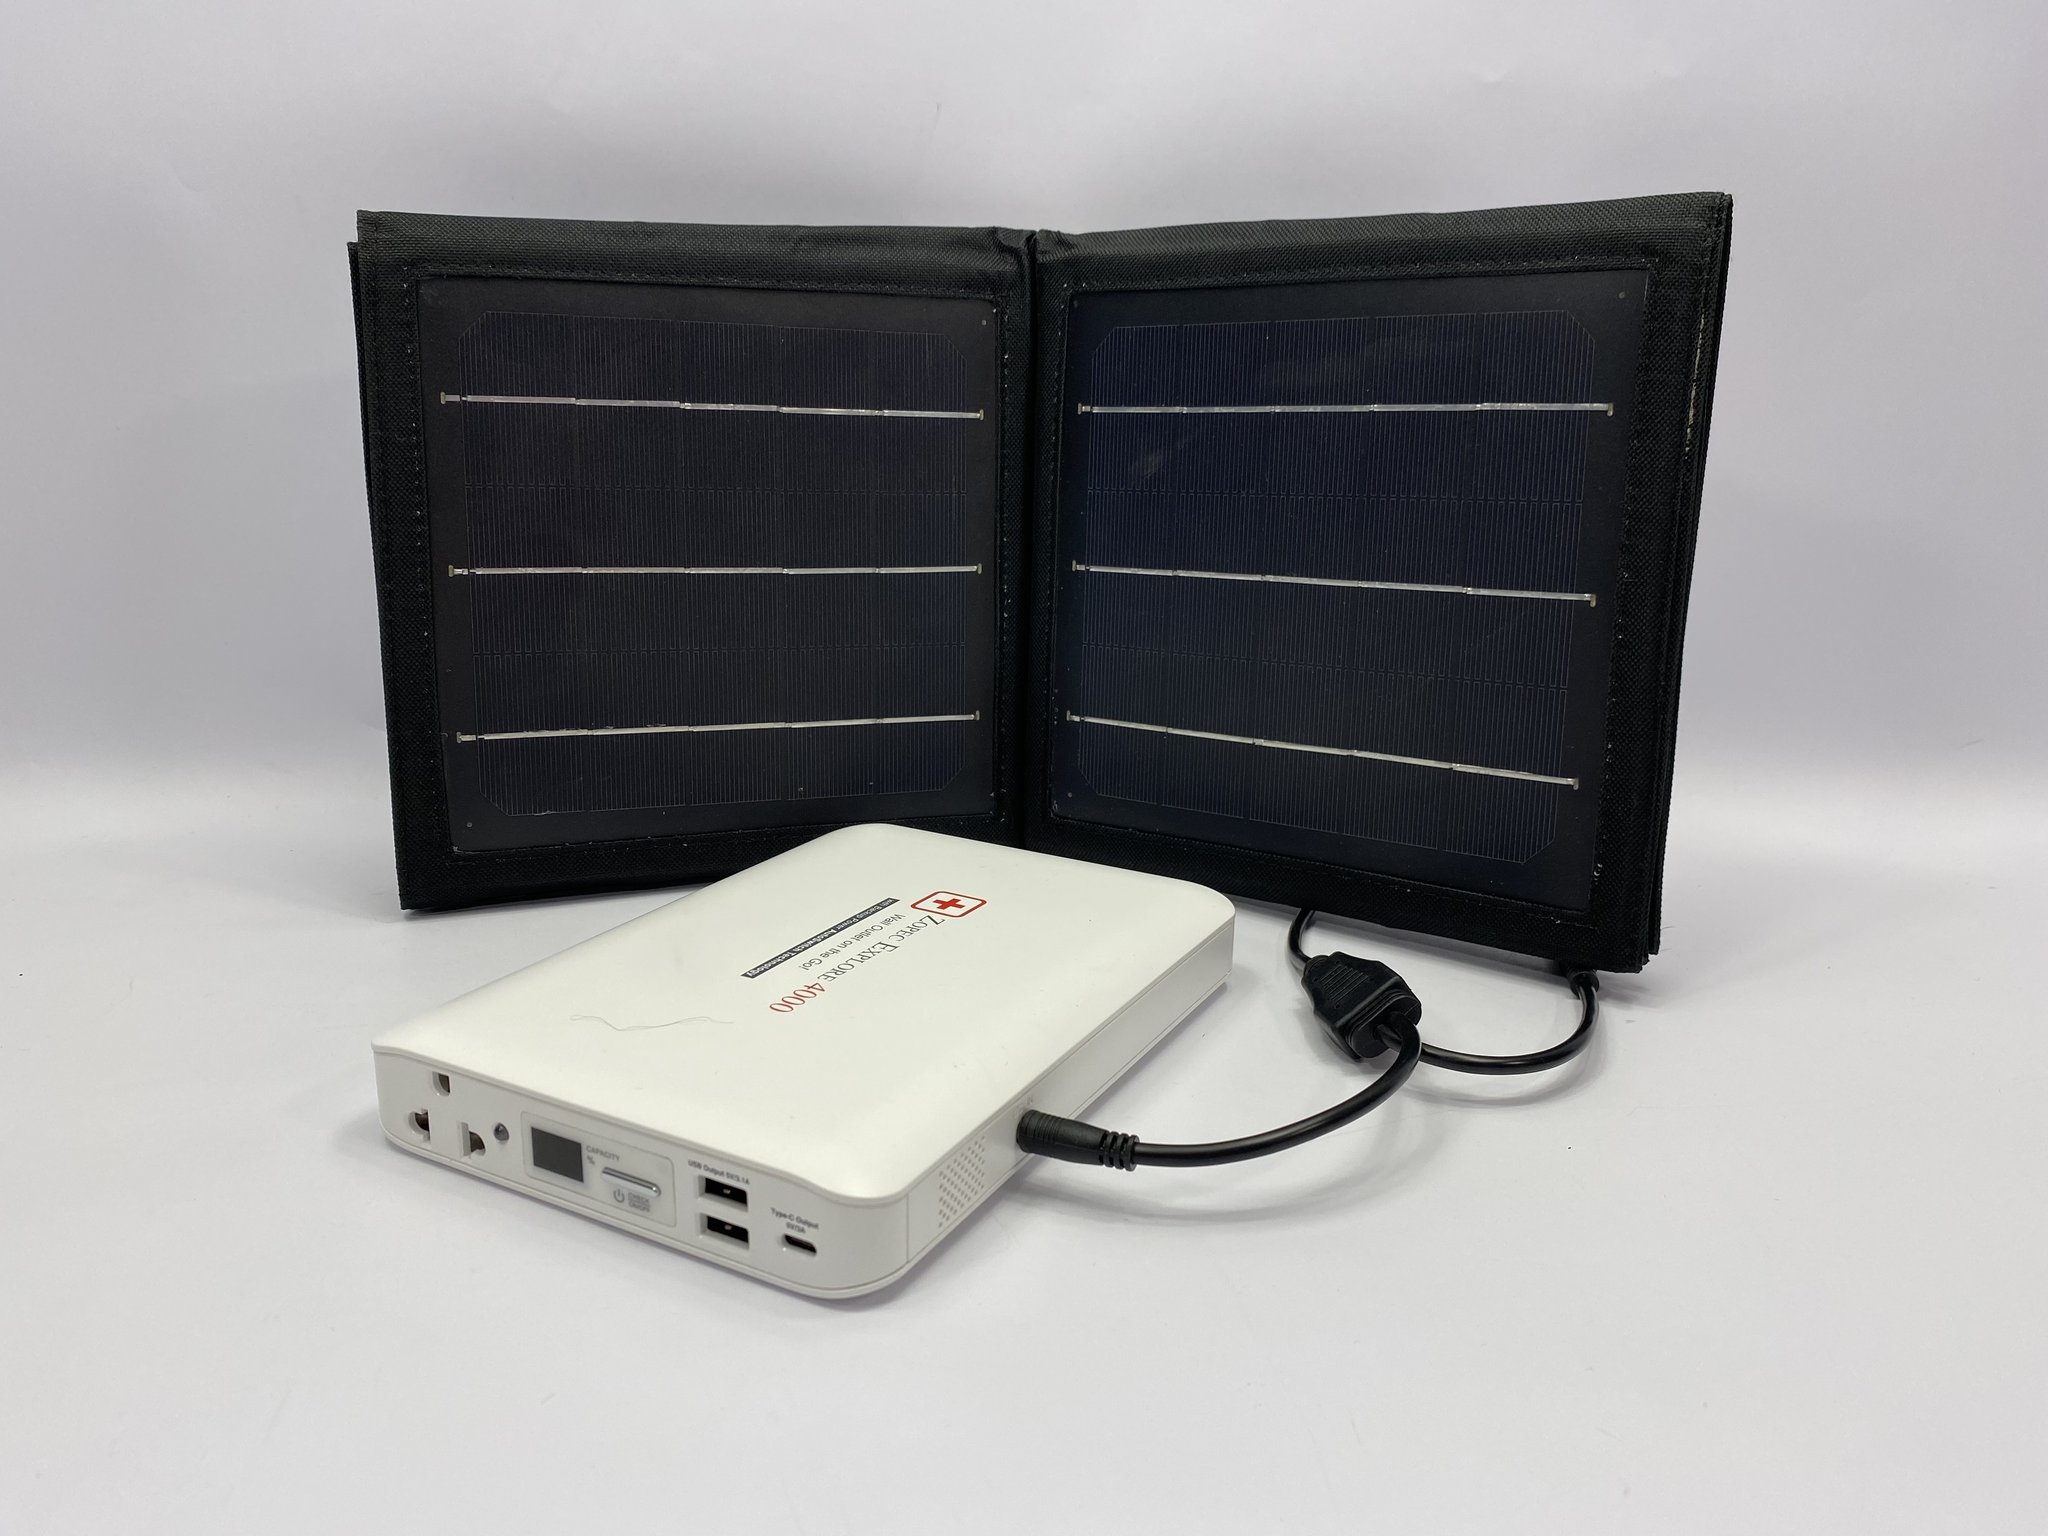 Zopec Explore Solar Panel Charger - shown with battery